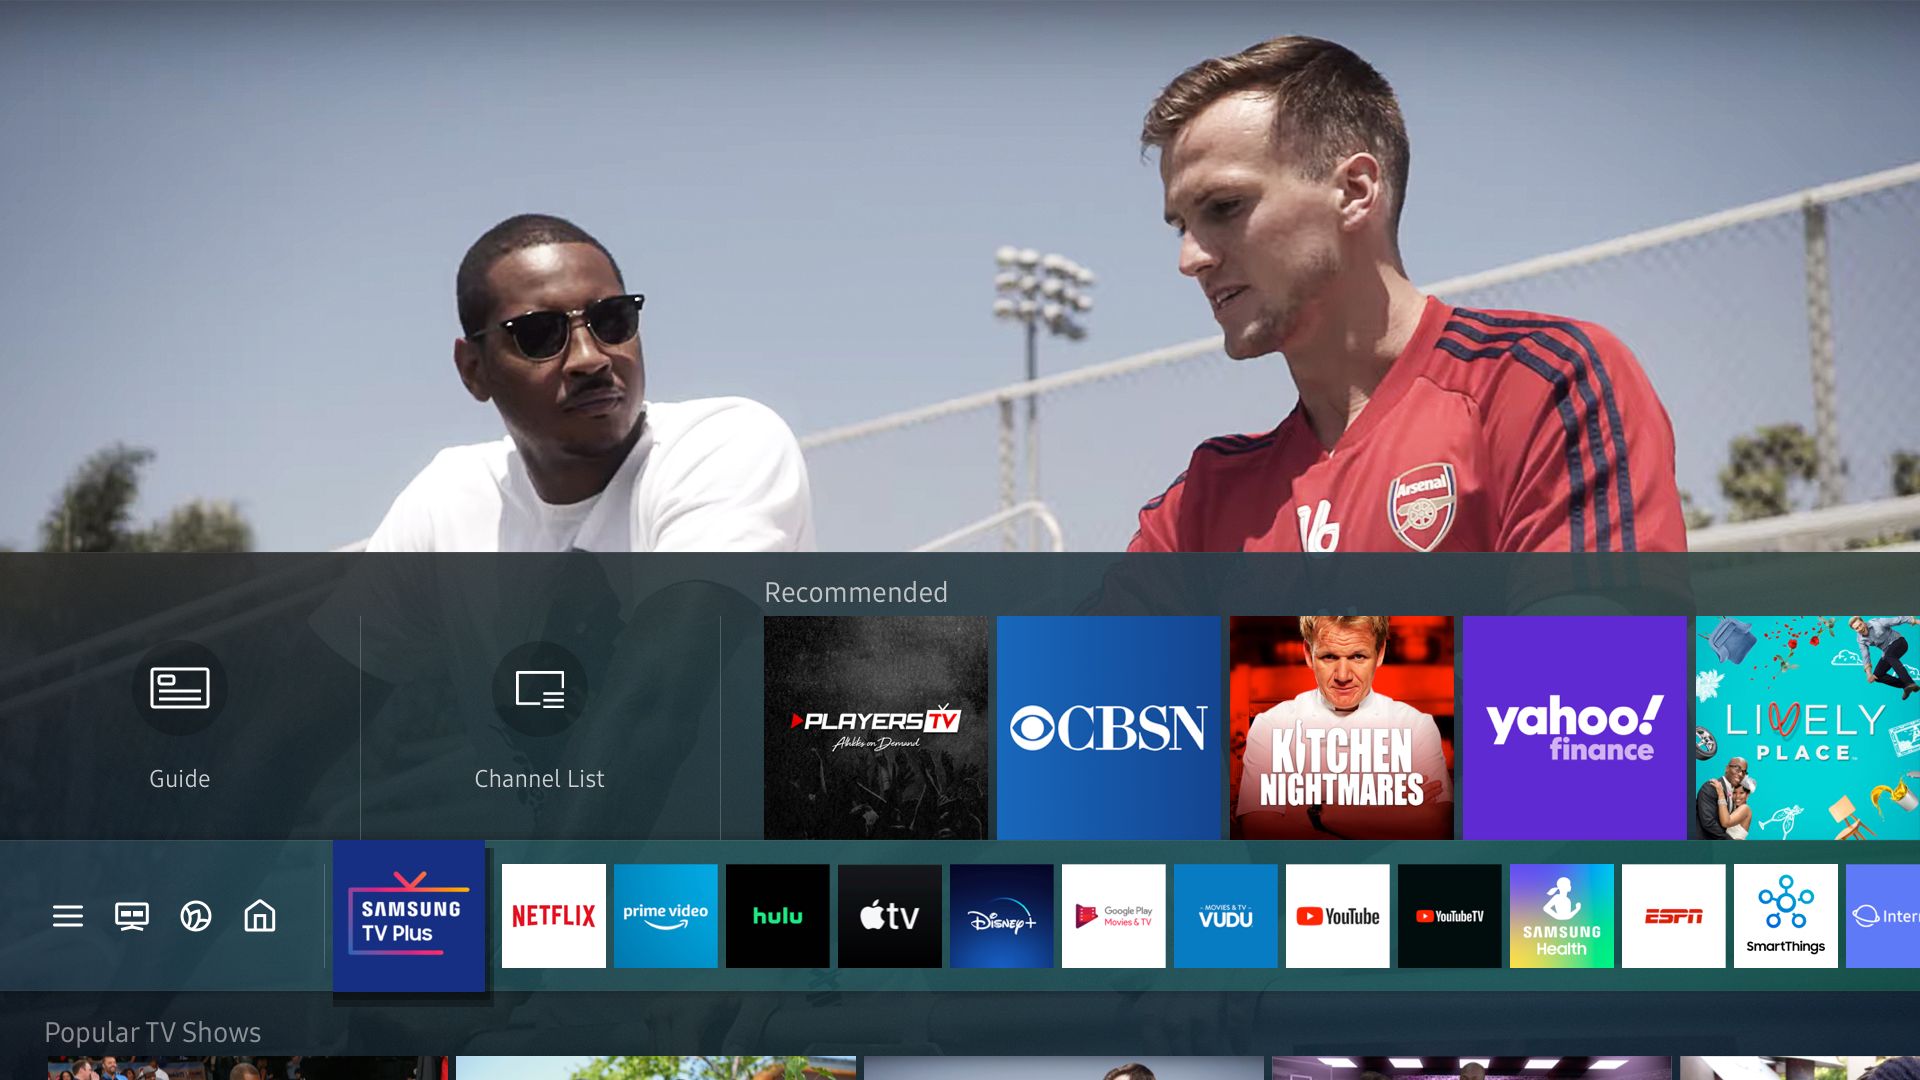 South Korean Samsung yesterday launched Samsung TV Plus in Brazil, the company's first video streaming service. It provides free access to 20 channels, including Bloomberg TV, BCC Gaming, InWild and Rocko's.